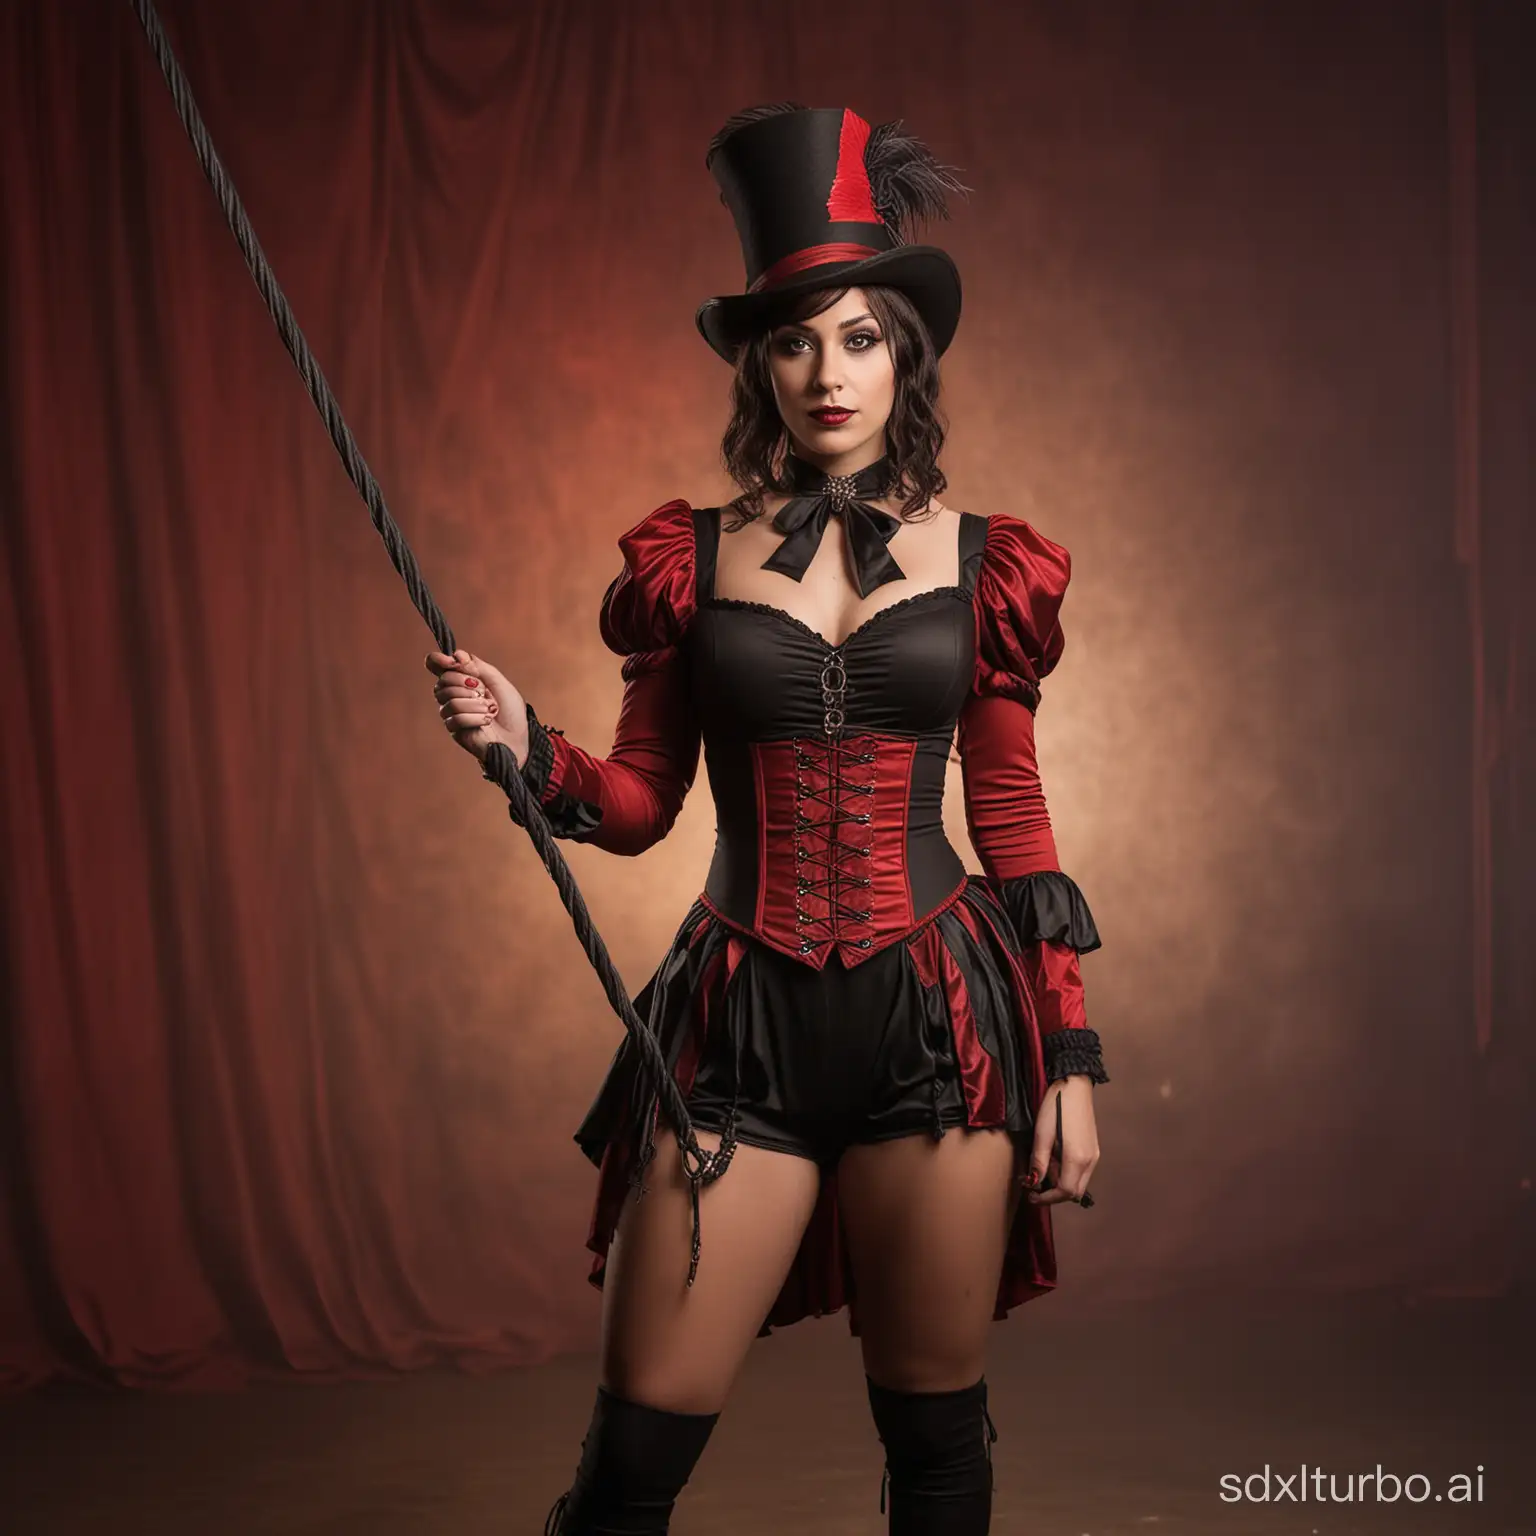 Gothic-Circus-Ringleader-with-Whip-in-Hand-amidst-Vibrant-Circus-Atmosphere